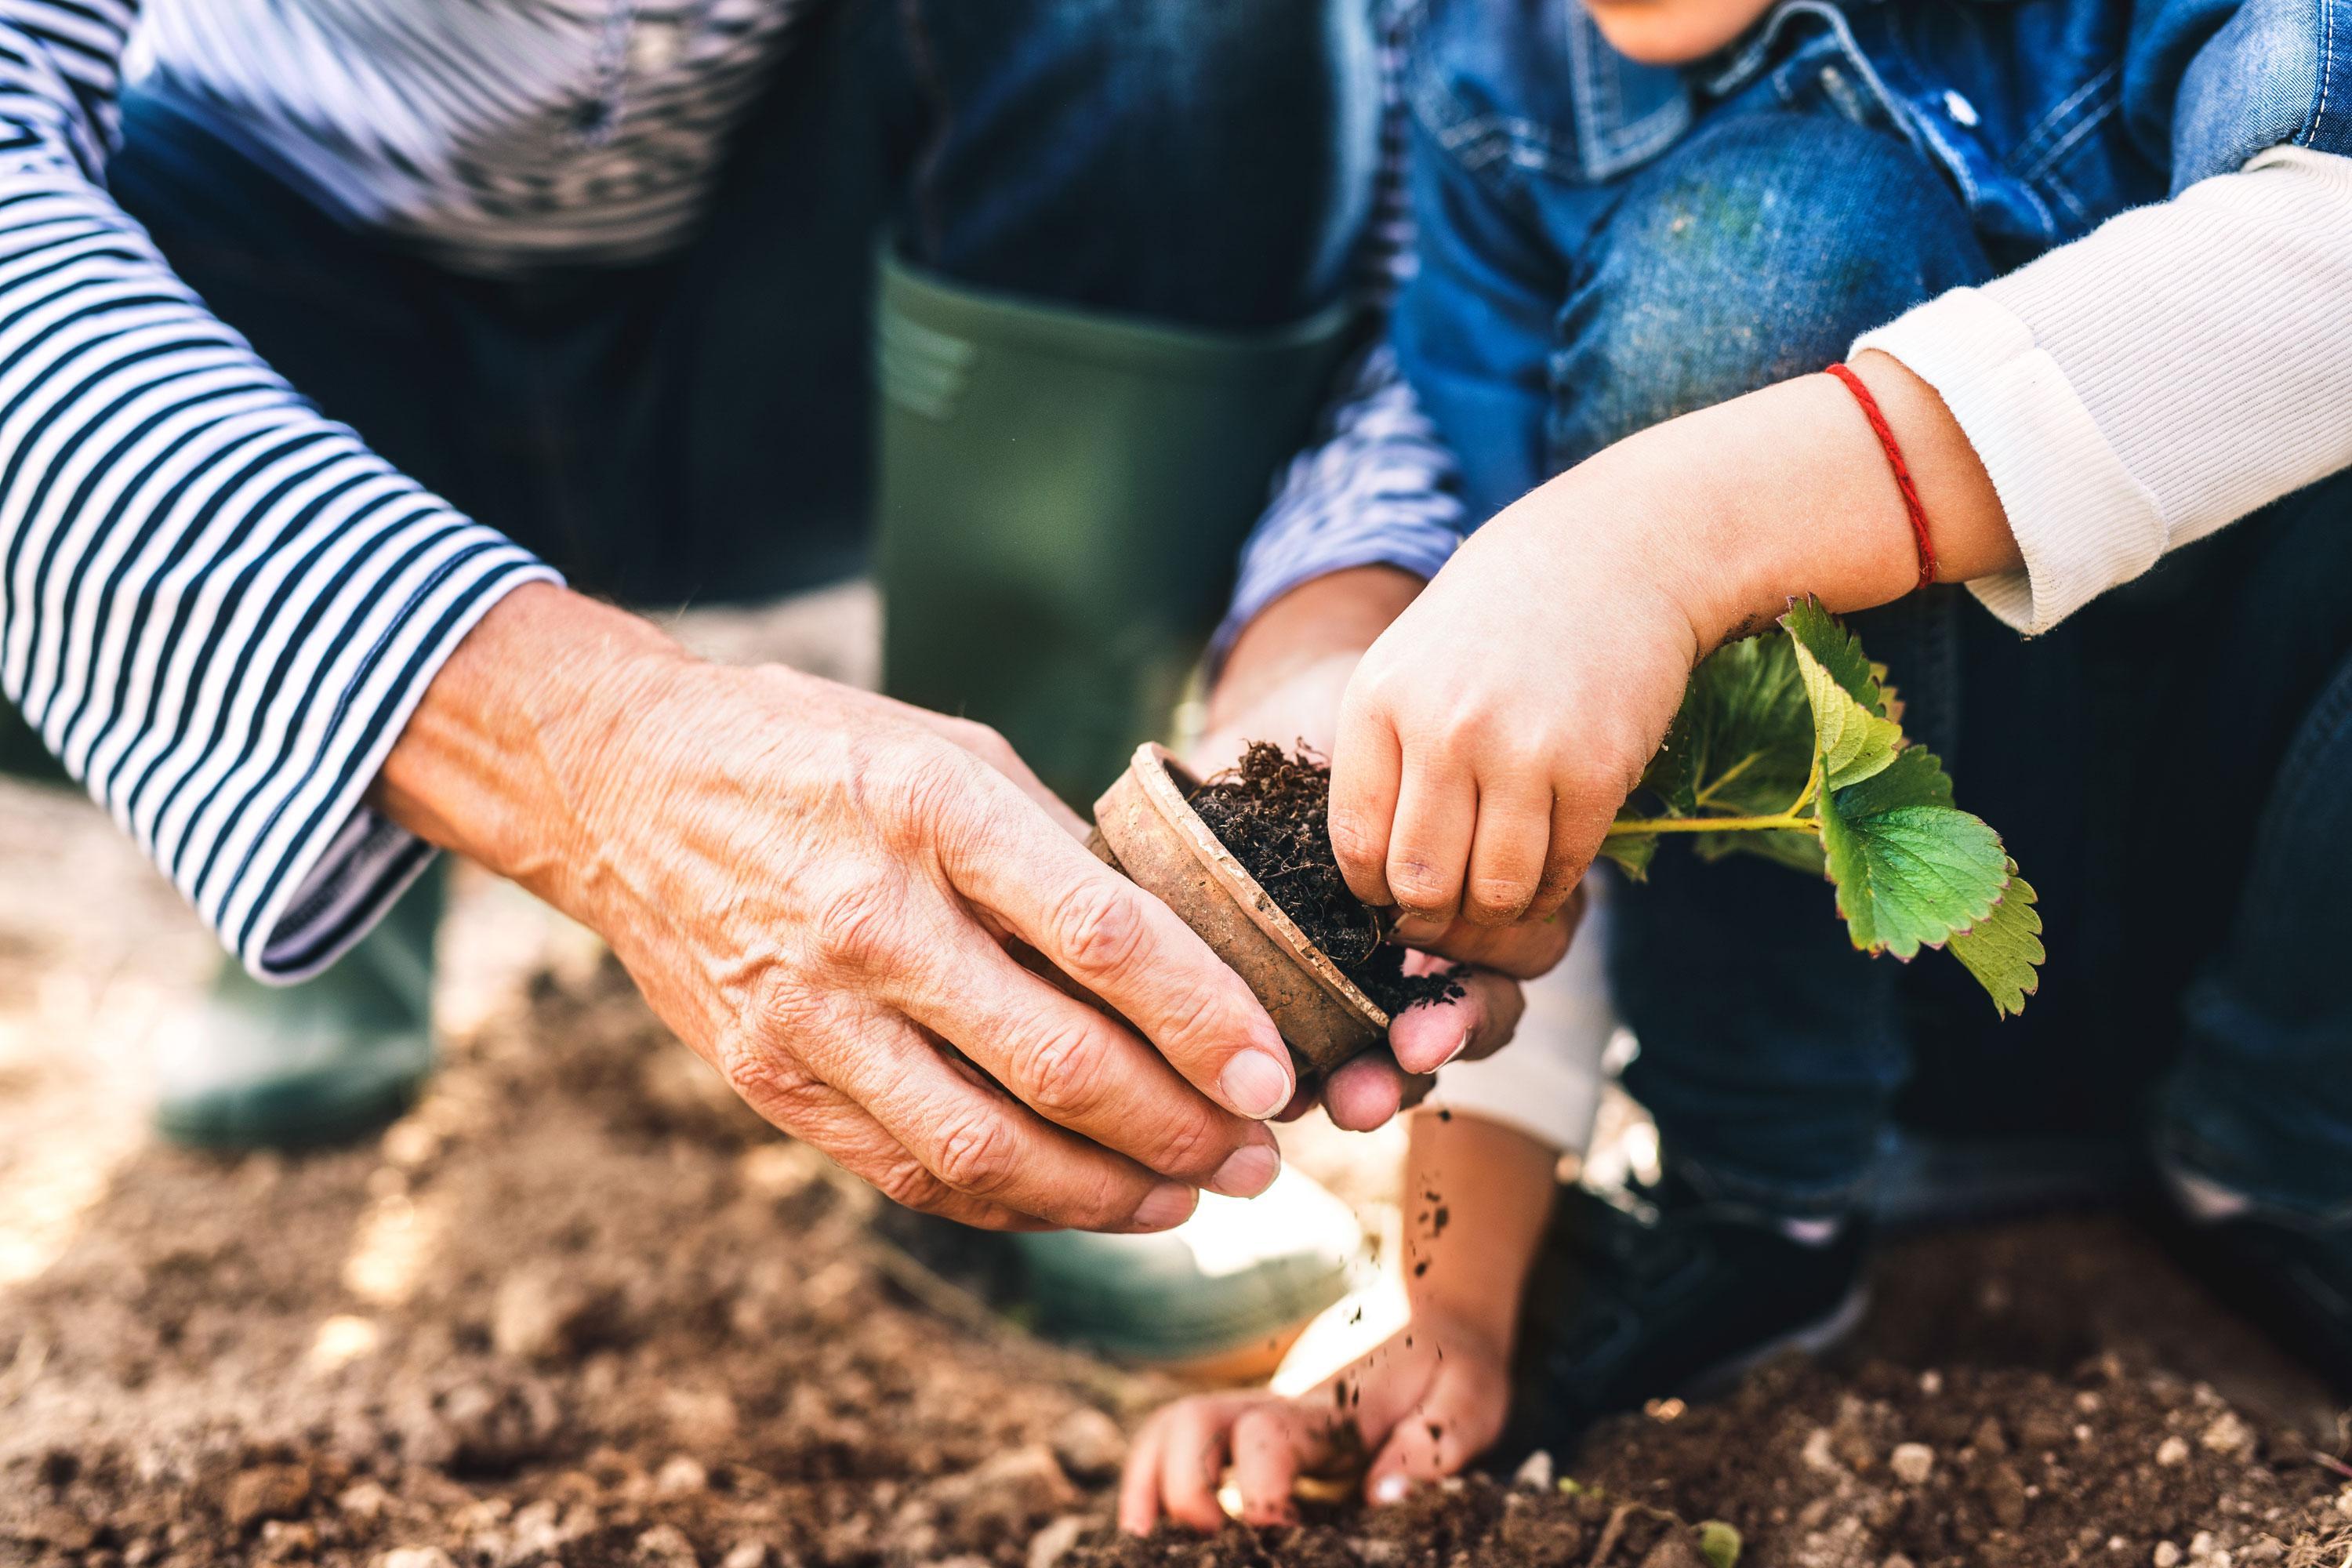 Outdoor garden – Multigeneration, a child helps their grandparent plant a seedling while wearing matching blue jeans